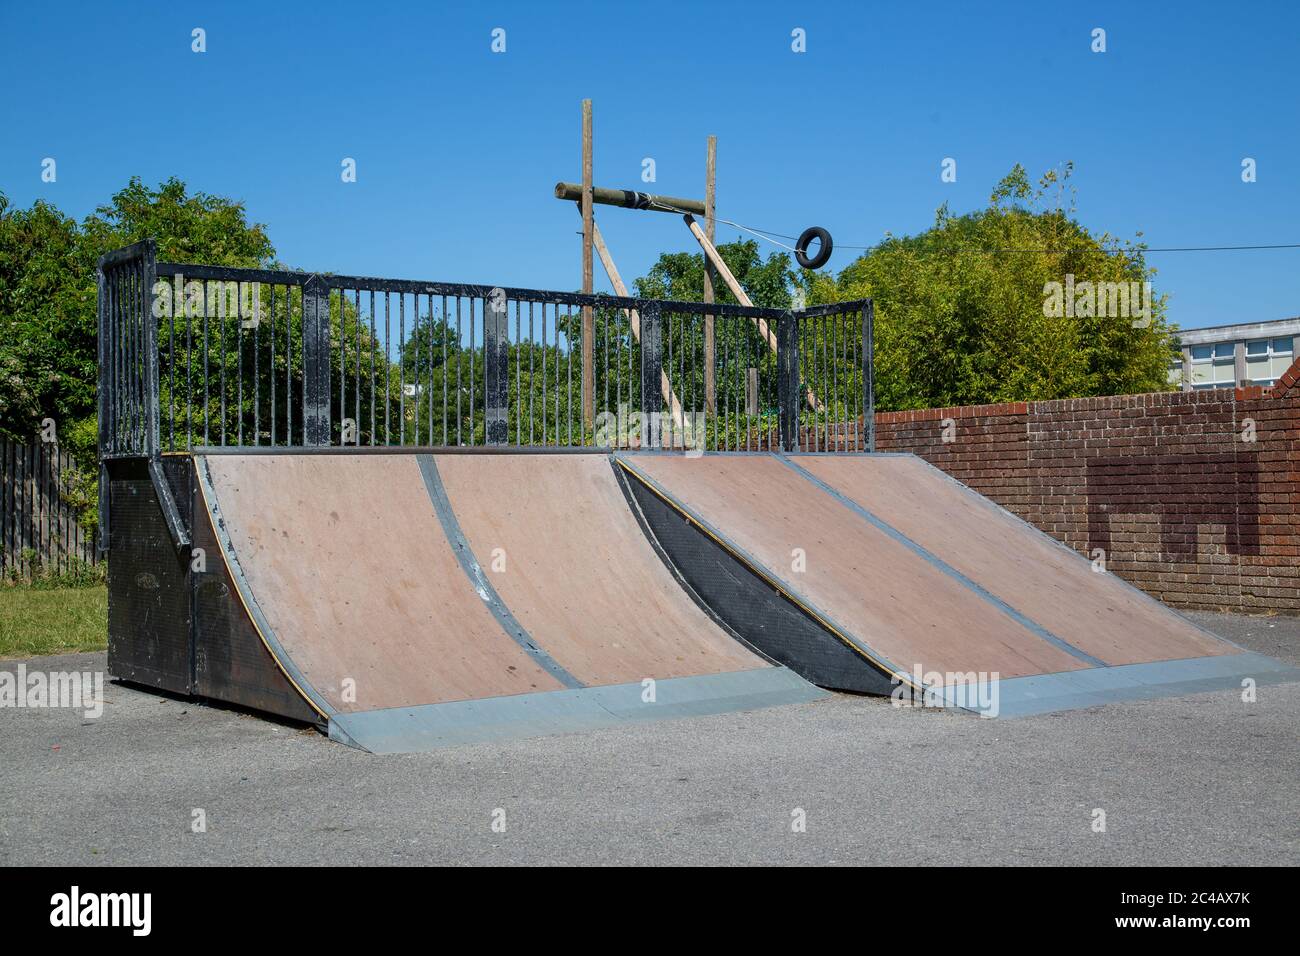 skate ramps in a local park for skateboarding with no people using them  Stock Photo - Alamy